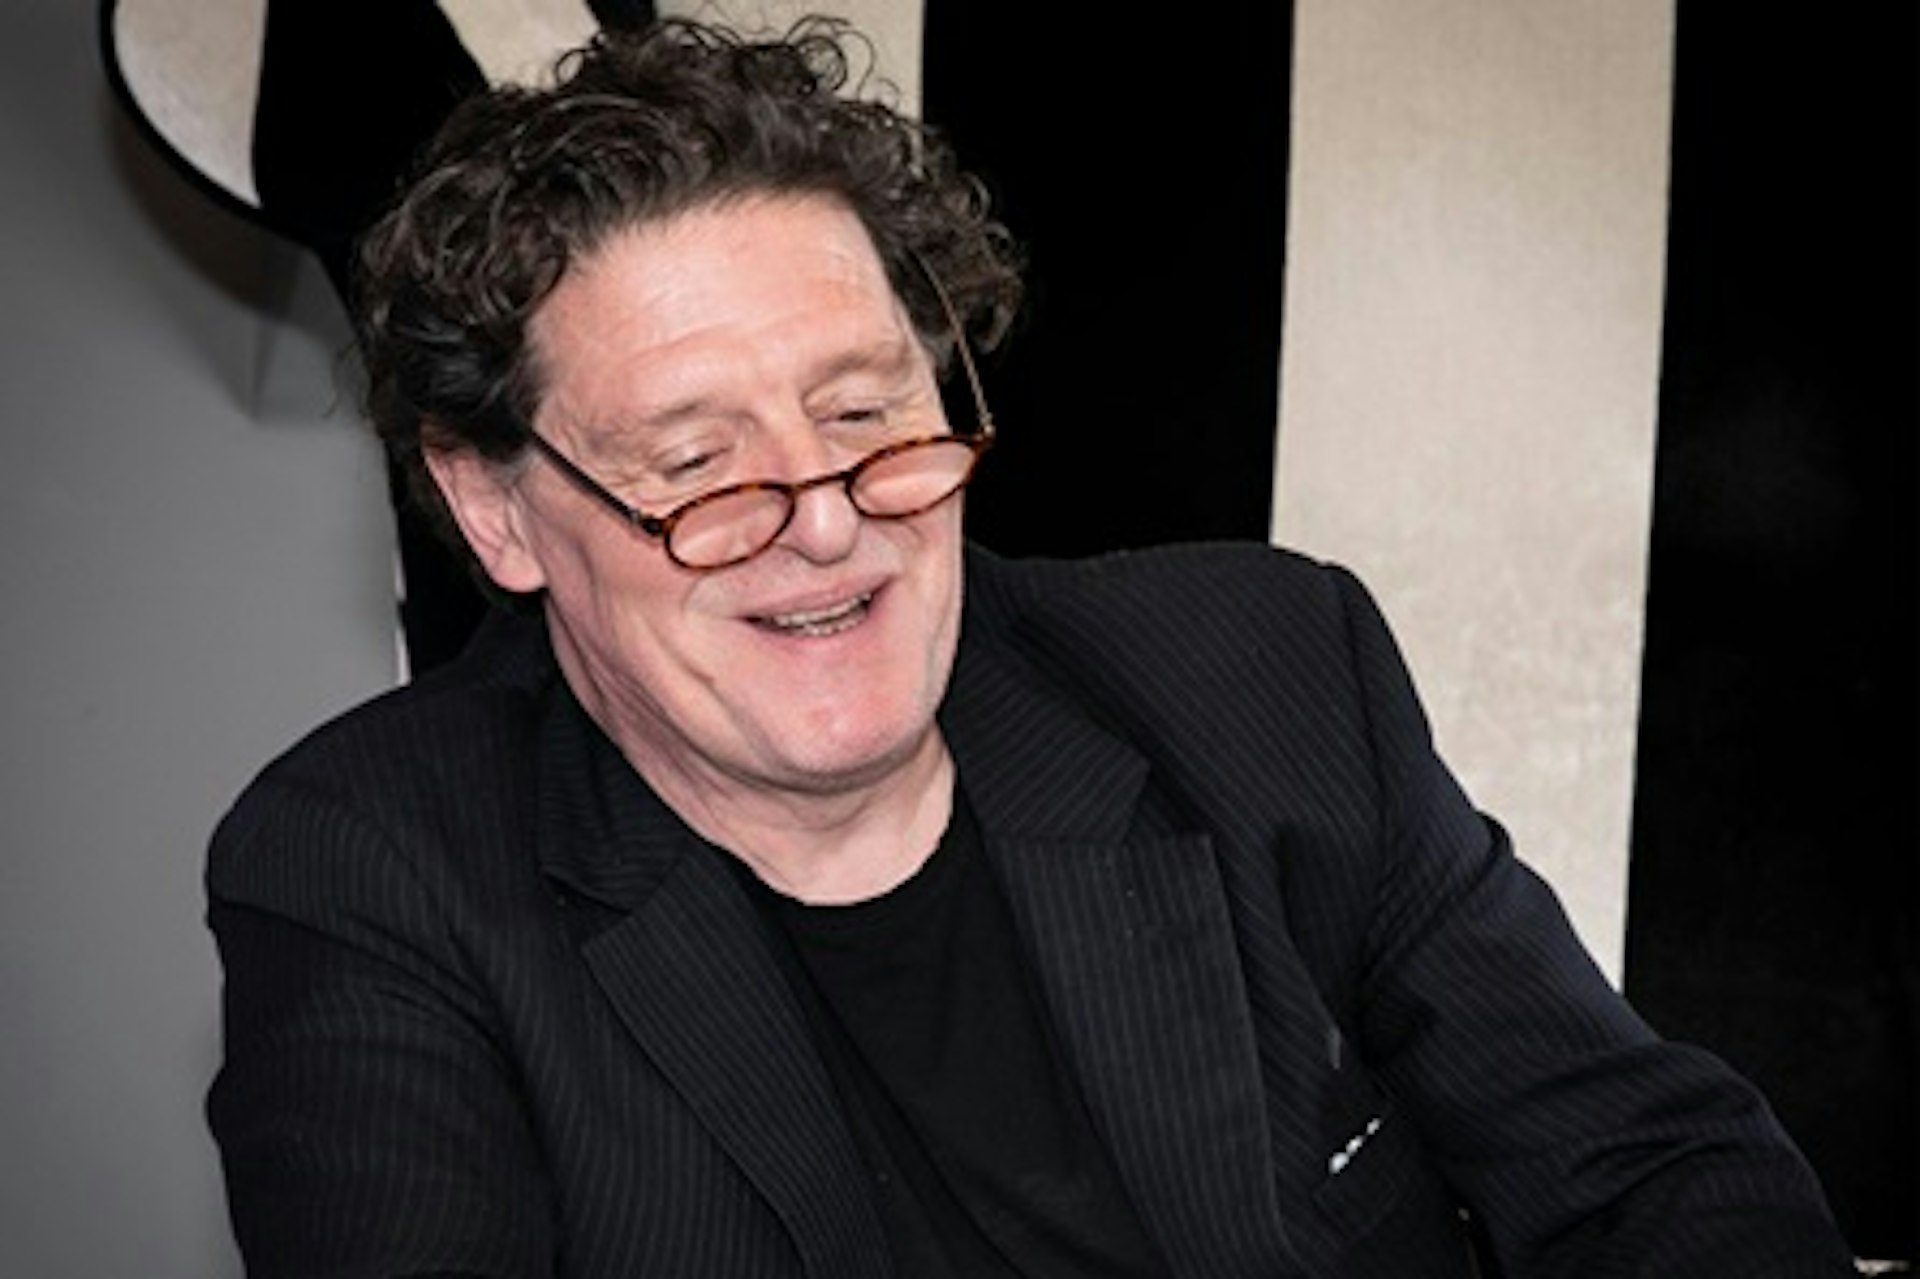 Wine and Dine with Acclaimed Chef Marco Pierre White for Two at the London Steakhouse Co - 22nd March 2022